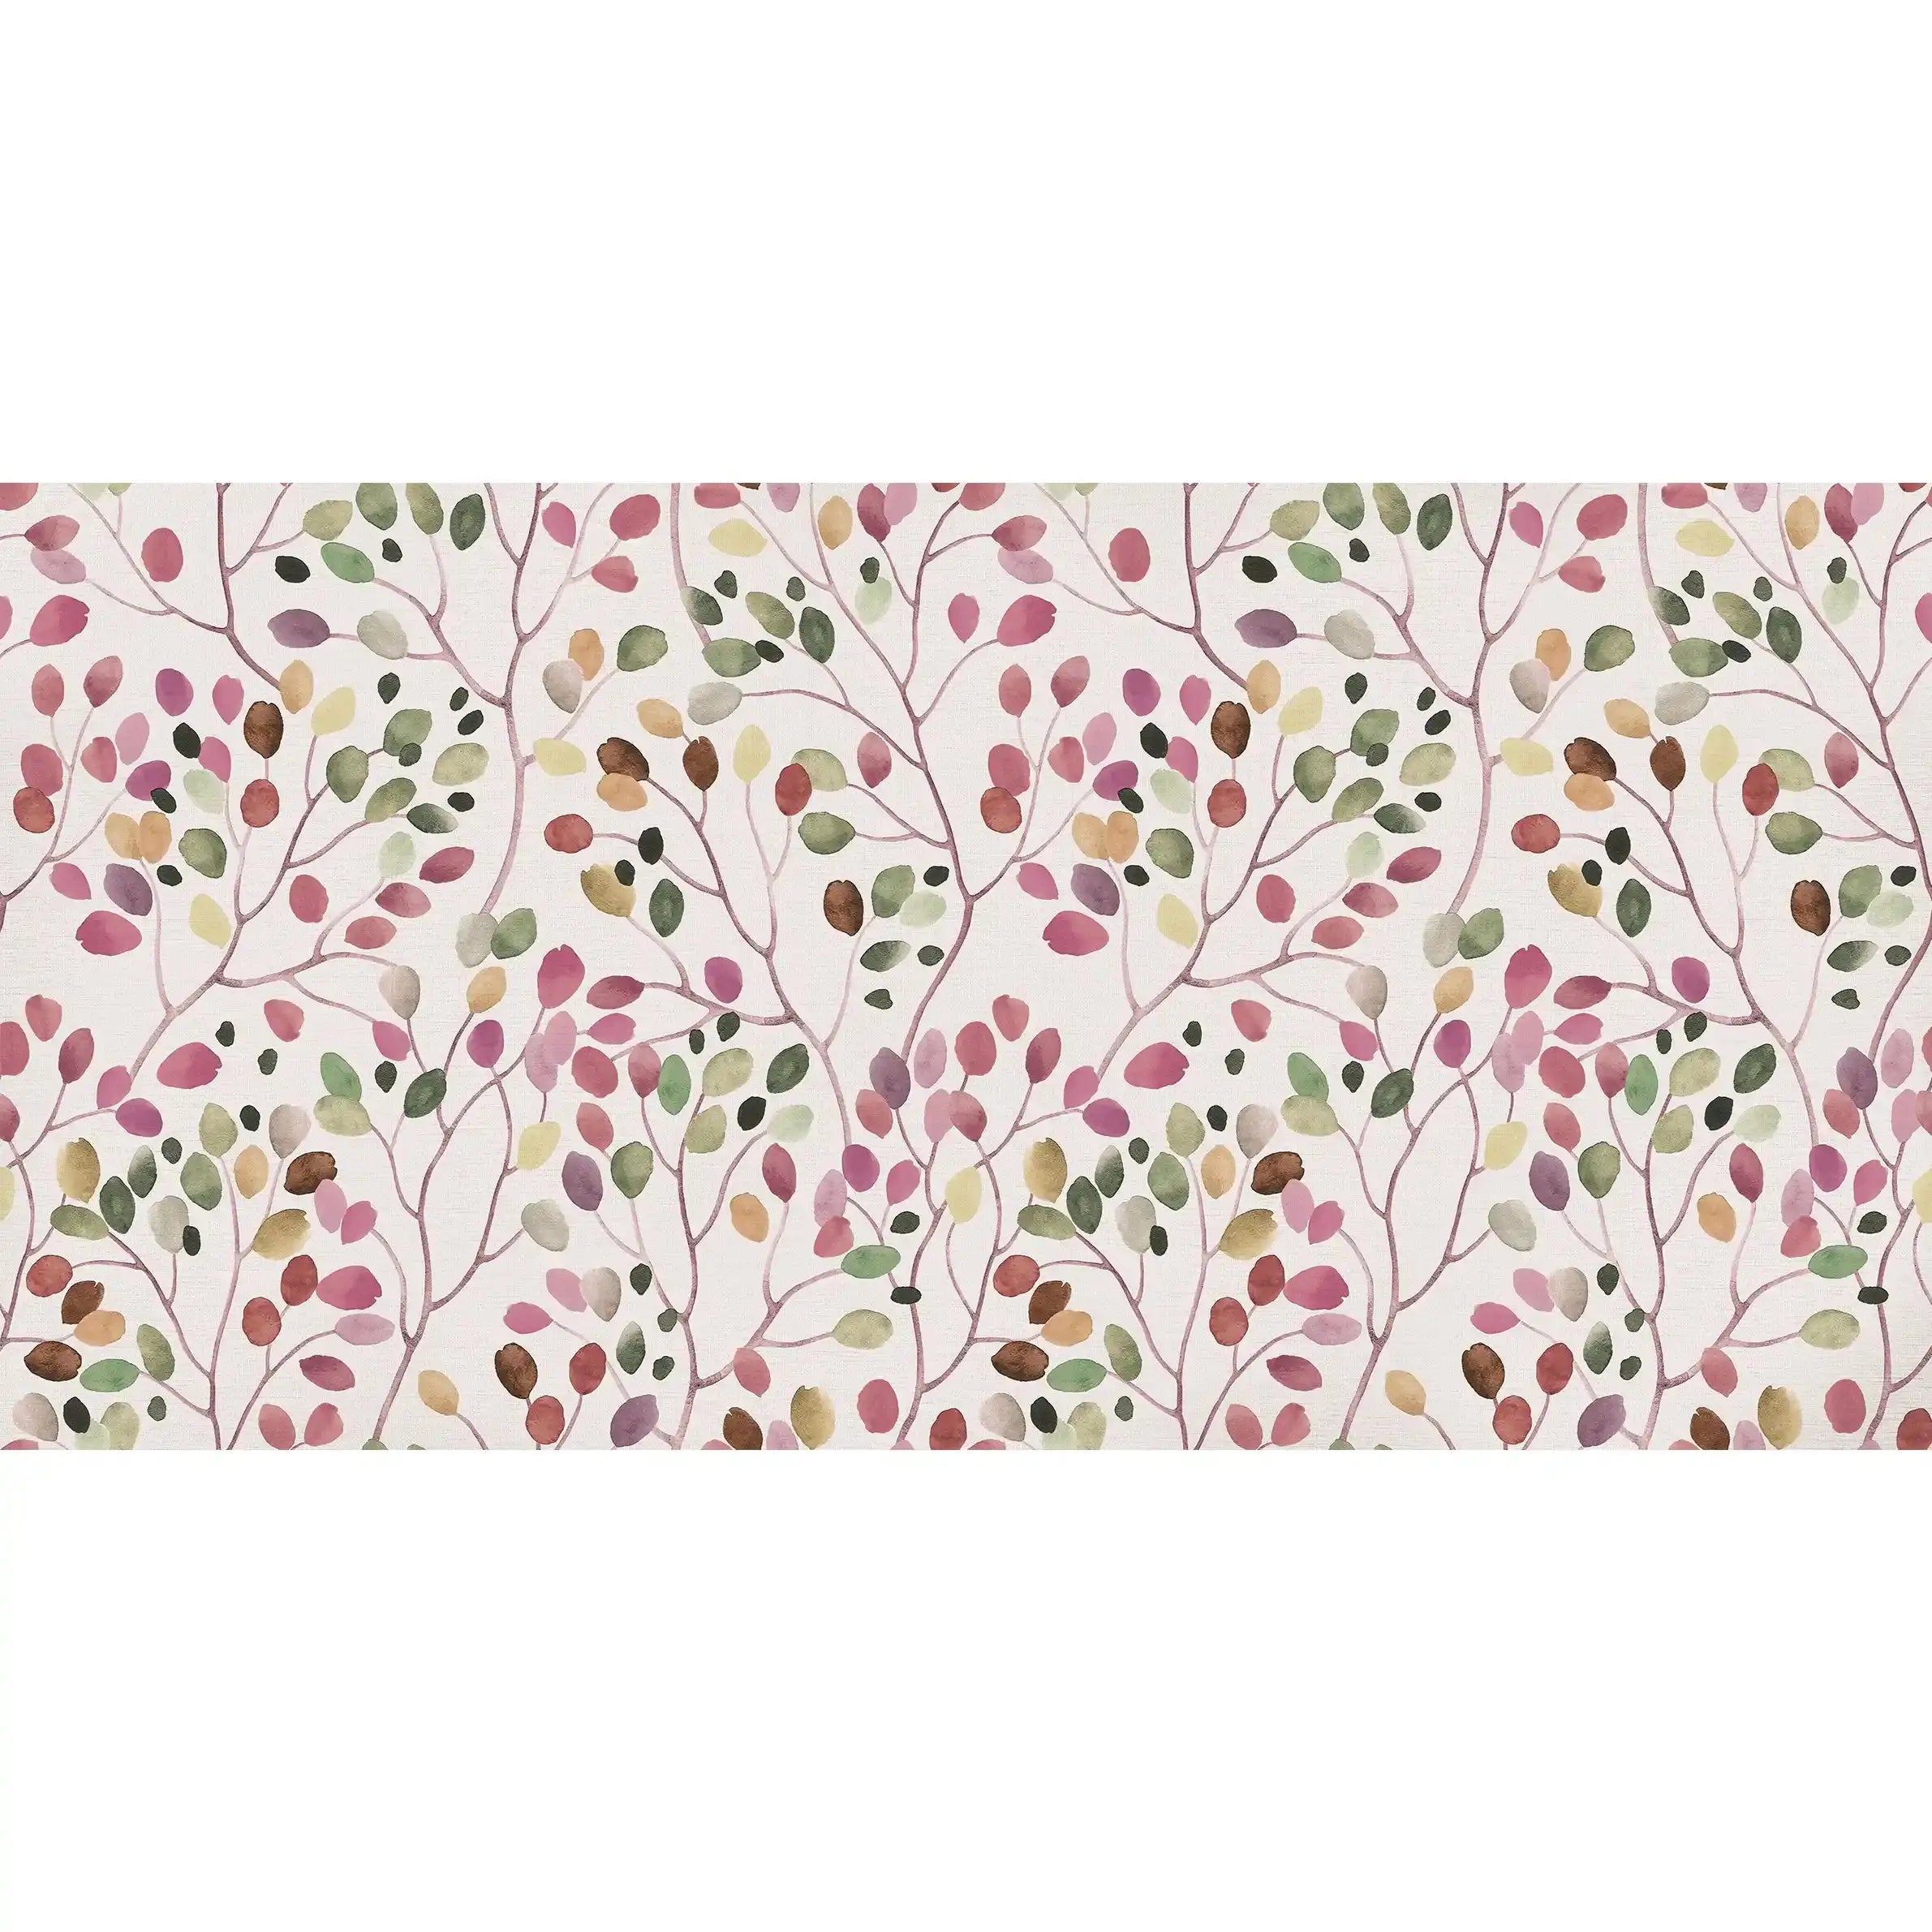 3063-C / Tropical Floral Peel and Stick Wallpaper - Colorful Woodland Branch, Decorative for Accent Wall, Removable and Easy to Install - Artevella